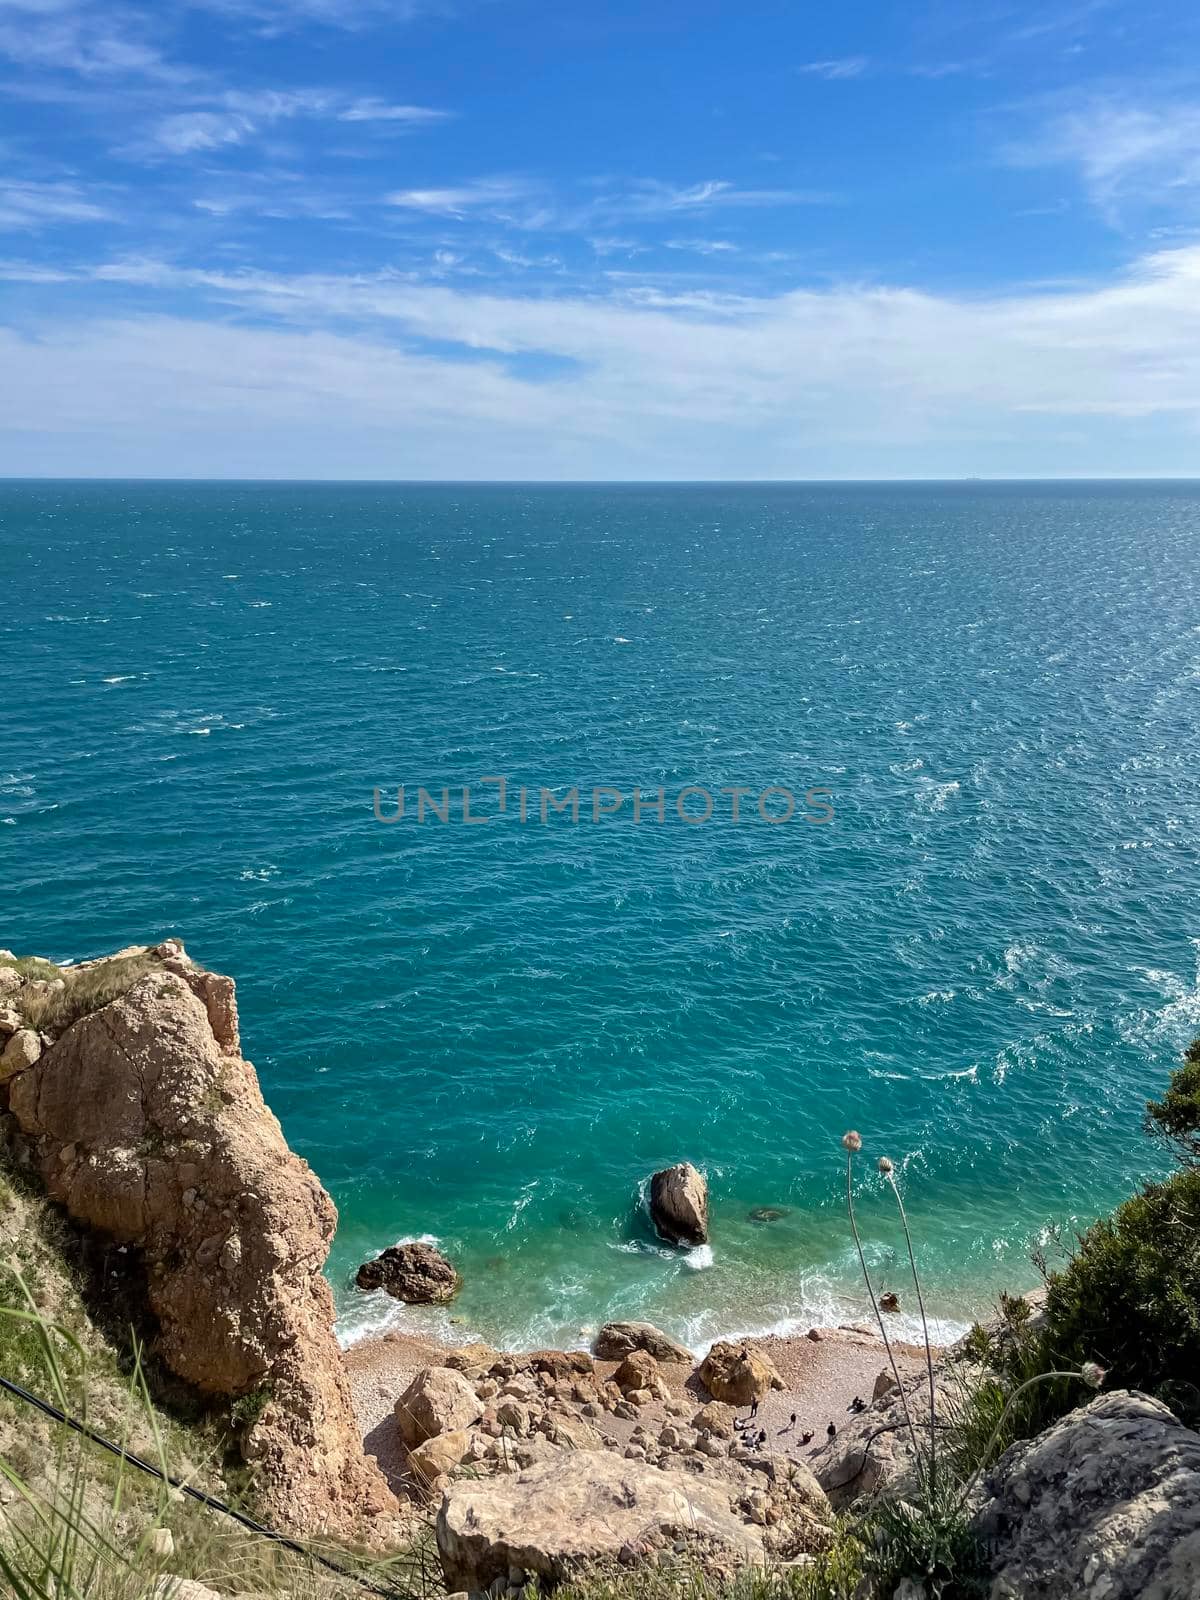 Scenic View Of Sea Against Clear Blue Sky - stock photo by kaliaevaen